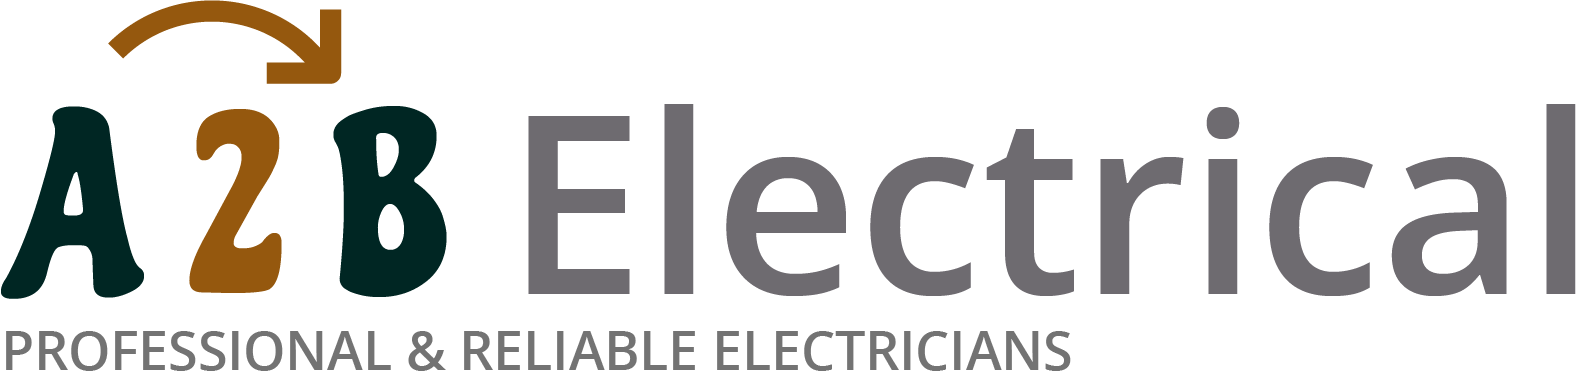 If you have electrical wiring problems in Crawley, we can provide an electrician to have a look for you. 